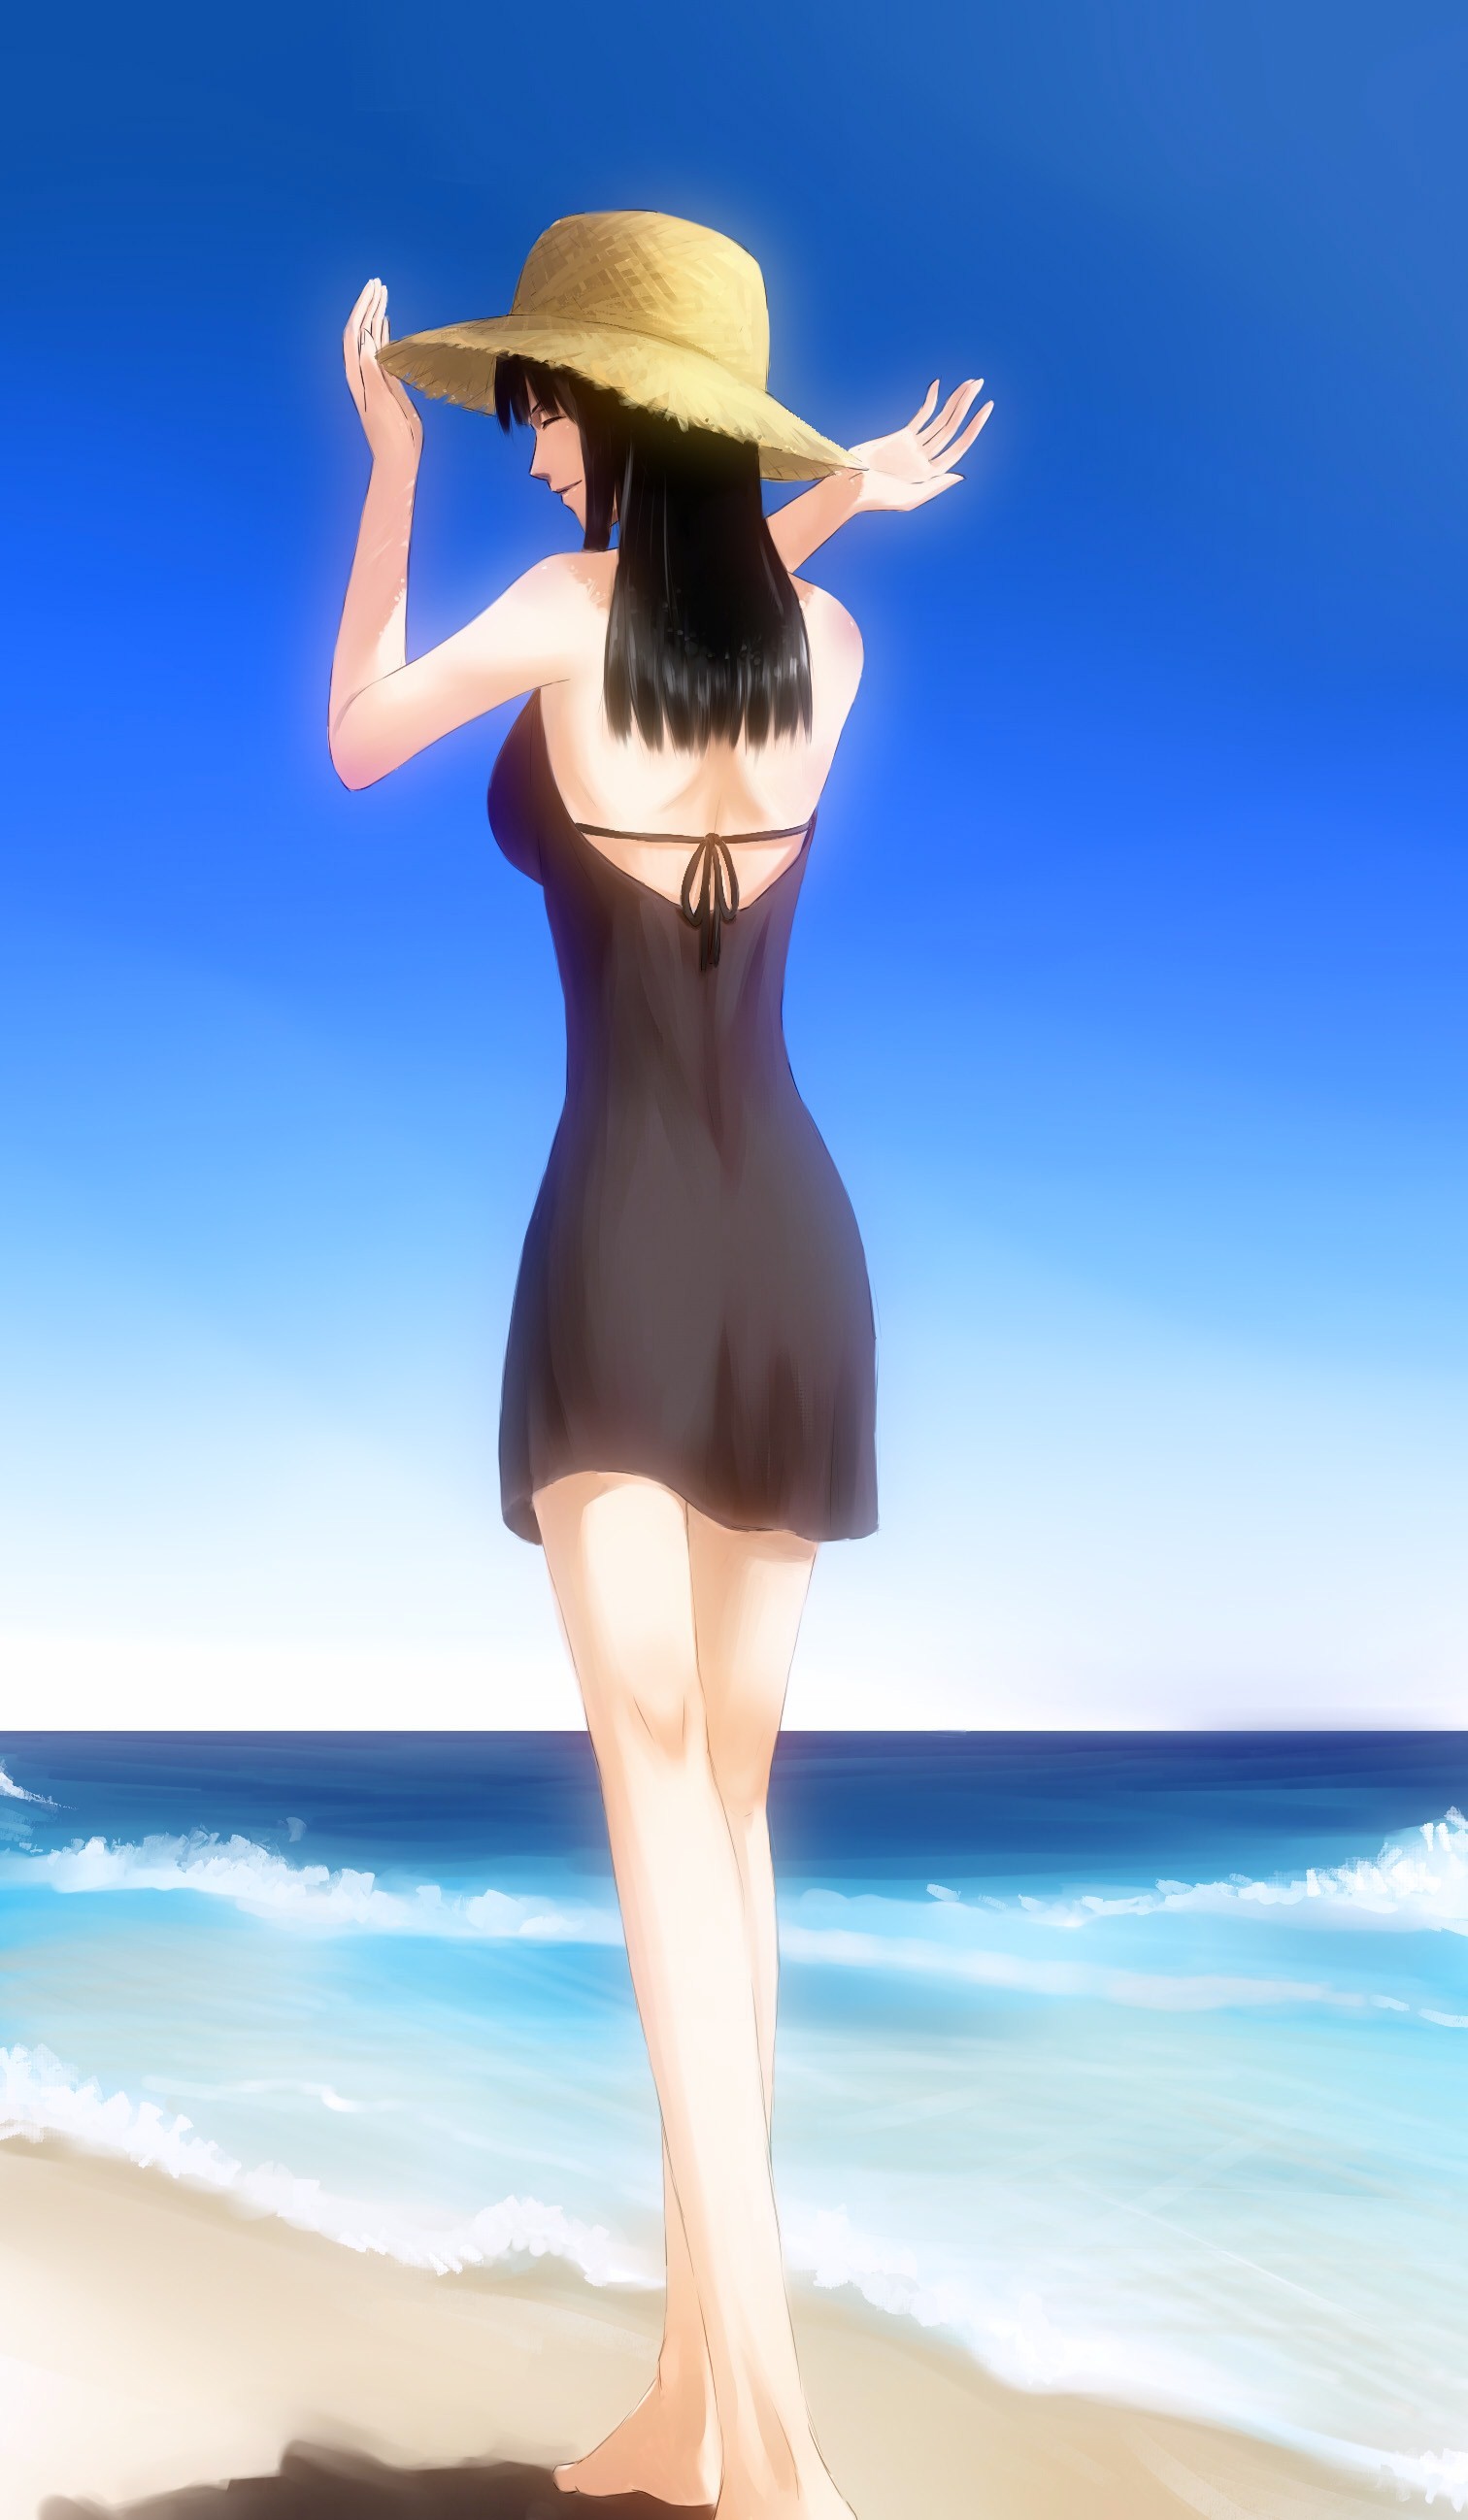 Nico Robin iPhone Wallpaper (71+ images)